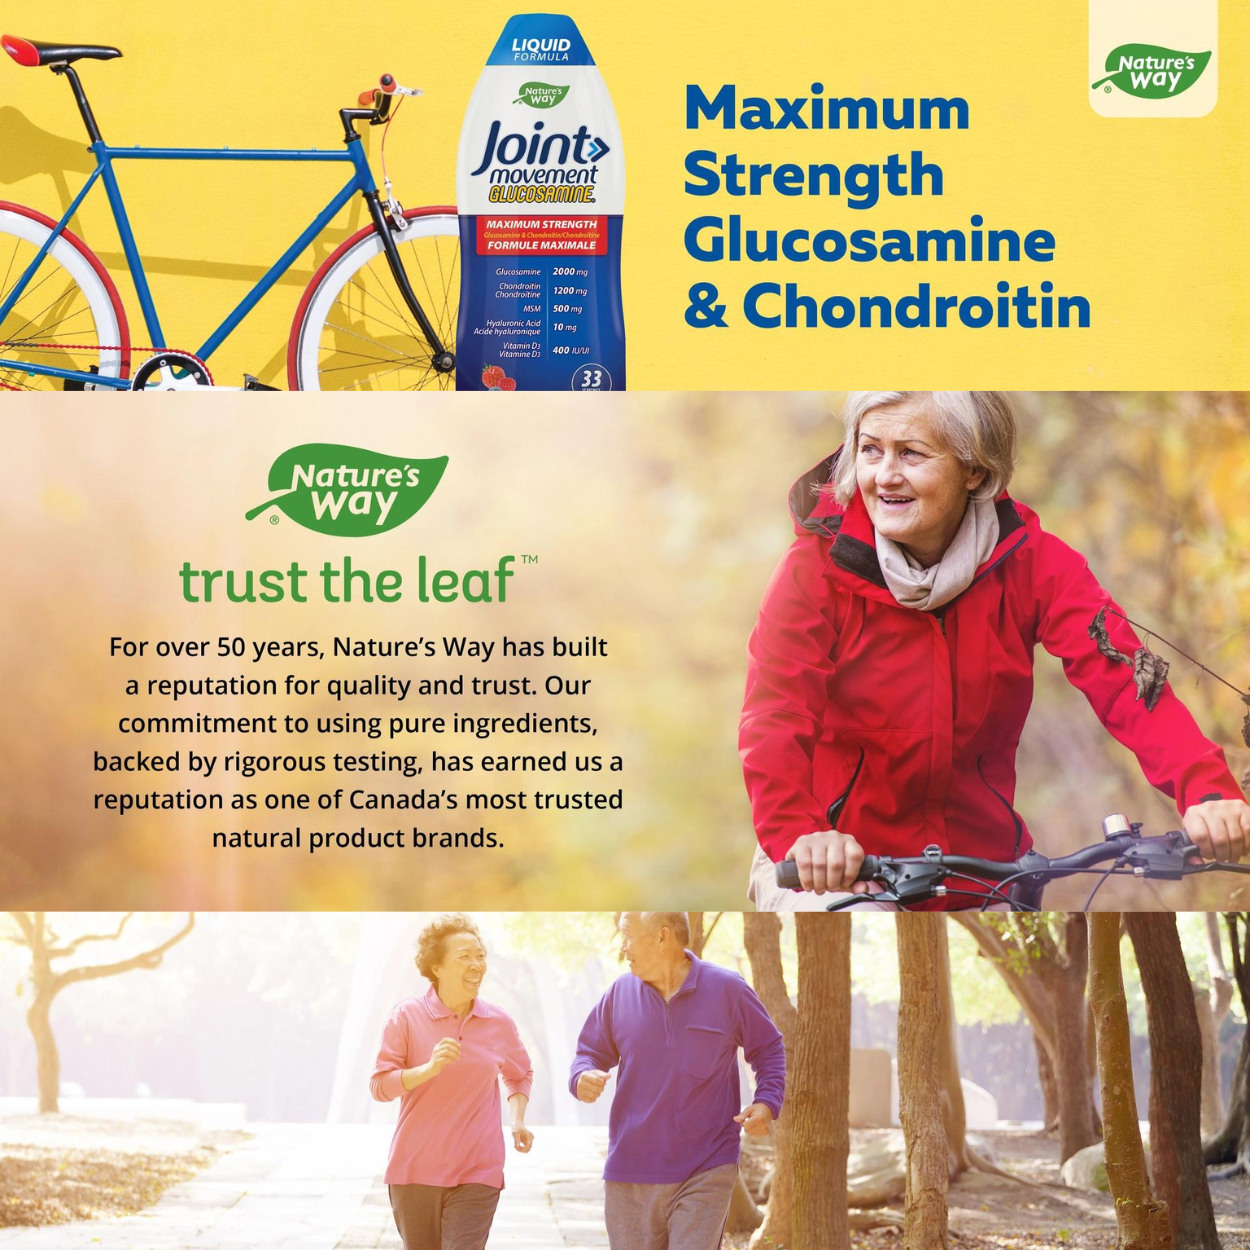 Nature’s Way Joint Movement Glucosamine, 1 L - canavitam